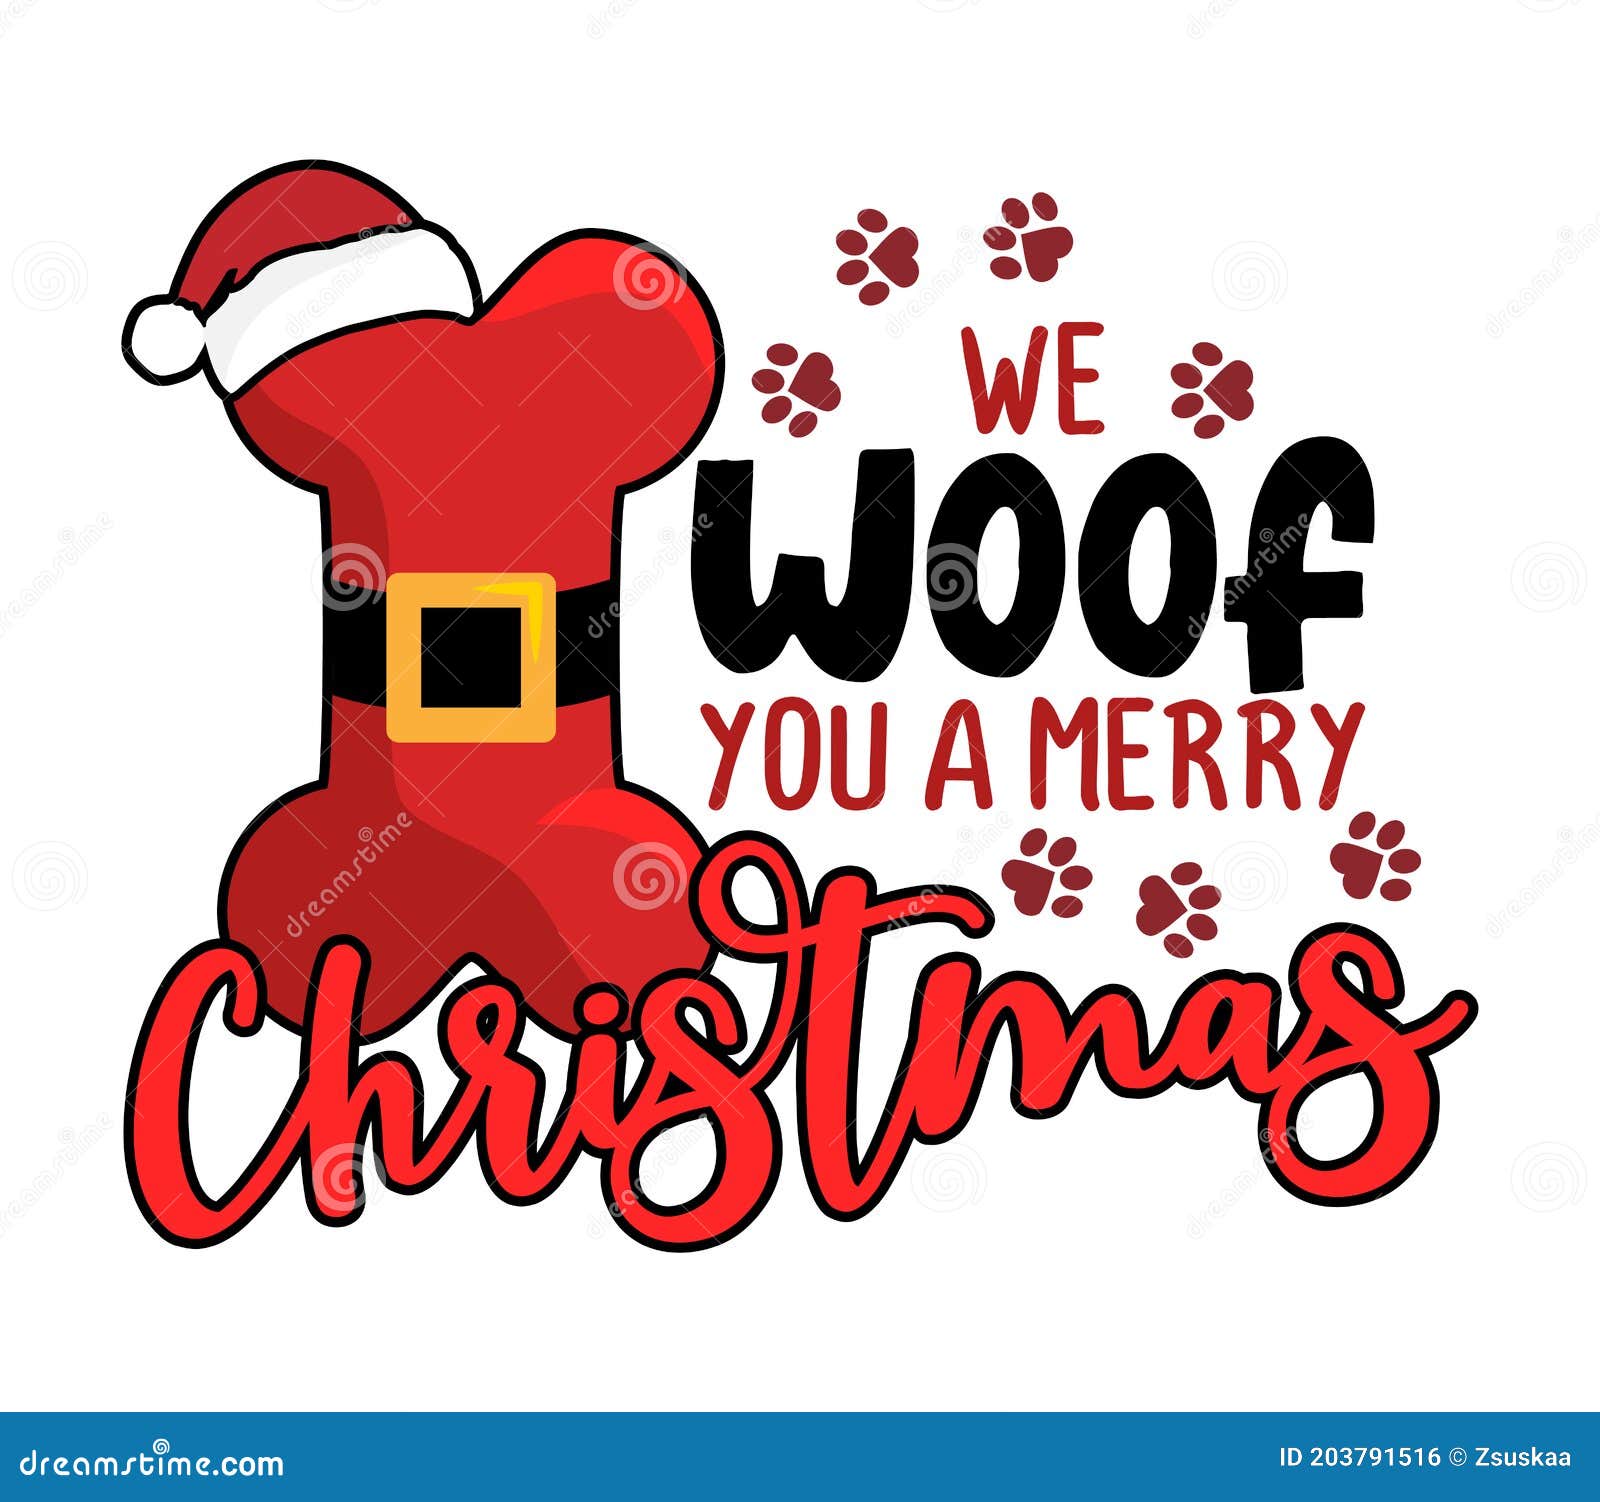 we woof you a merry christmas - calligraphy phrase for christmas.